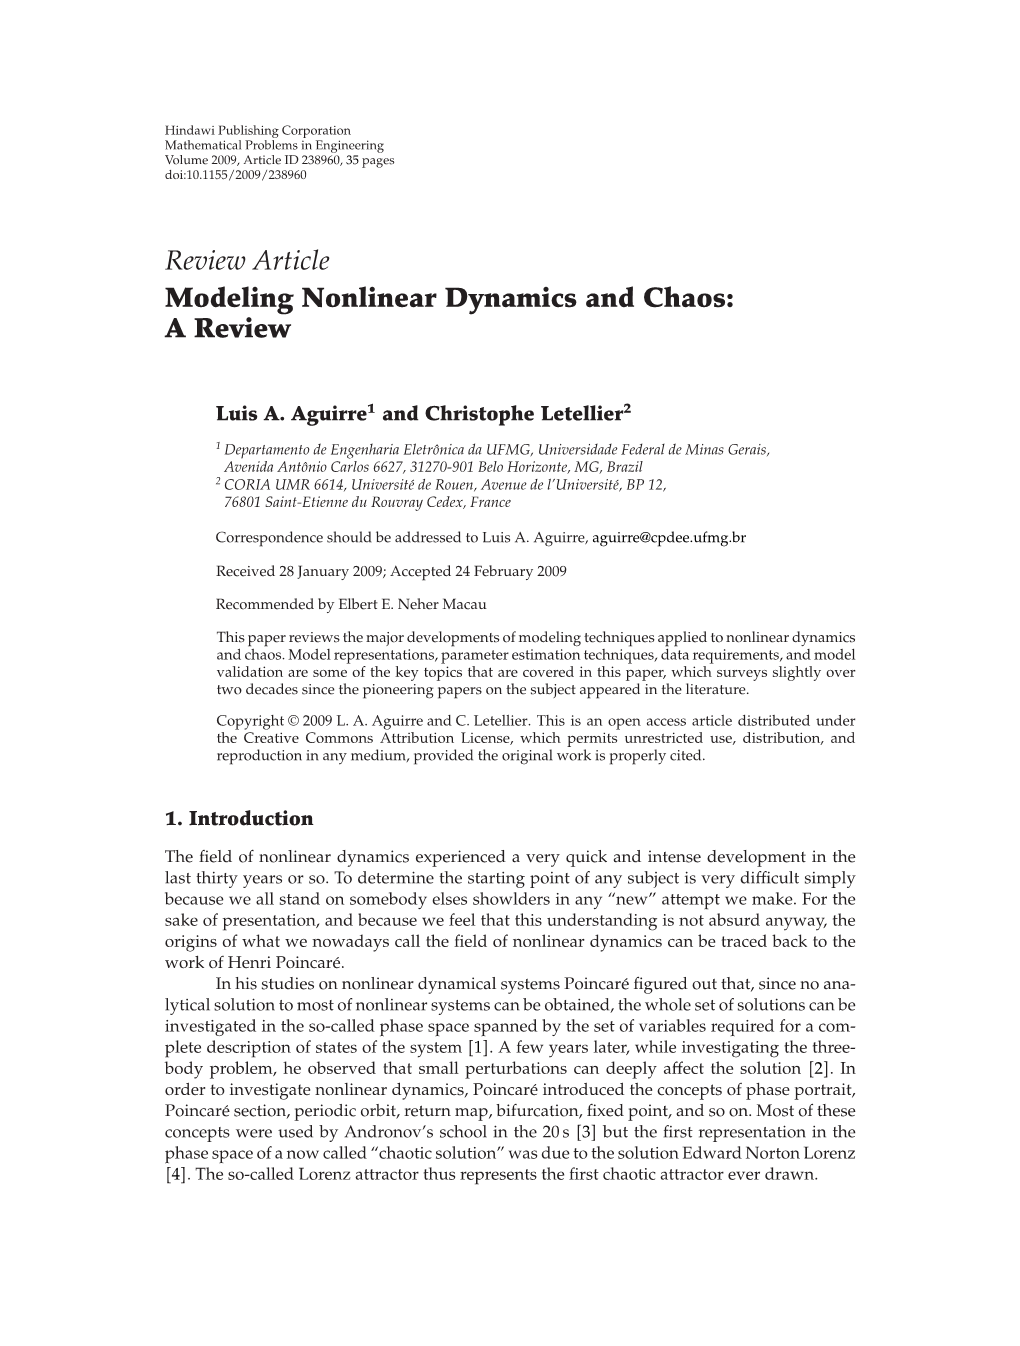 Modeling Nonlinear Dynamics and Chaos: a Review